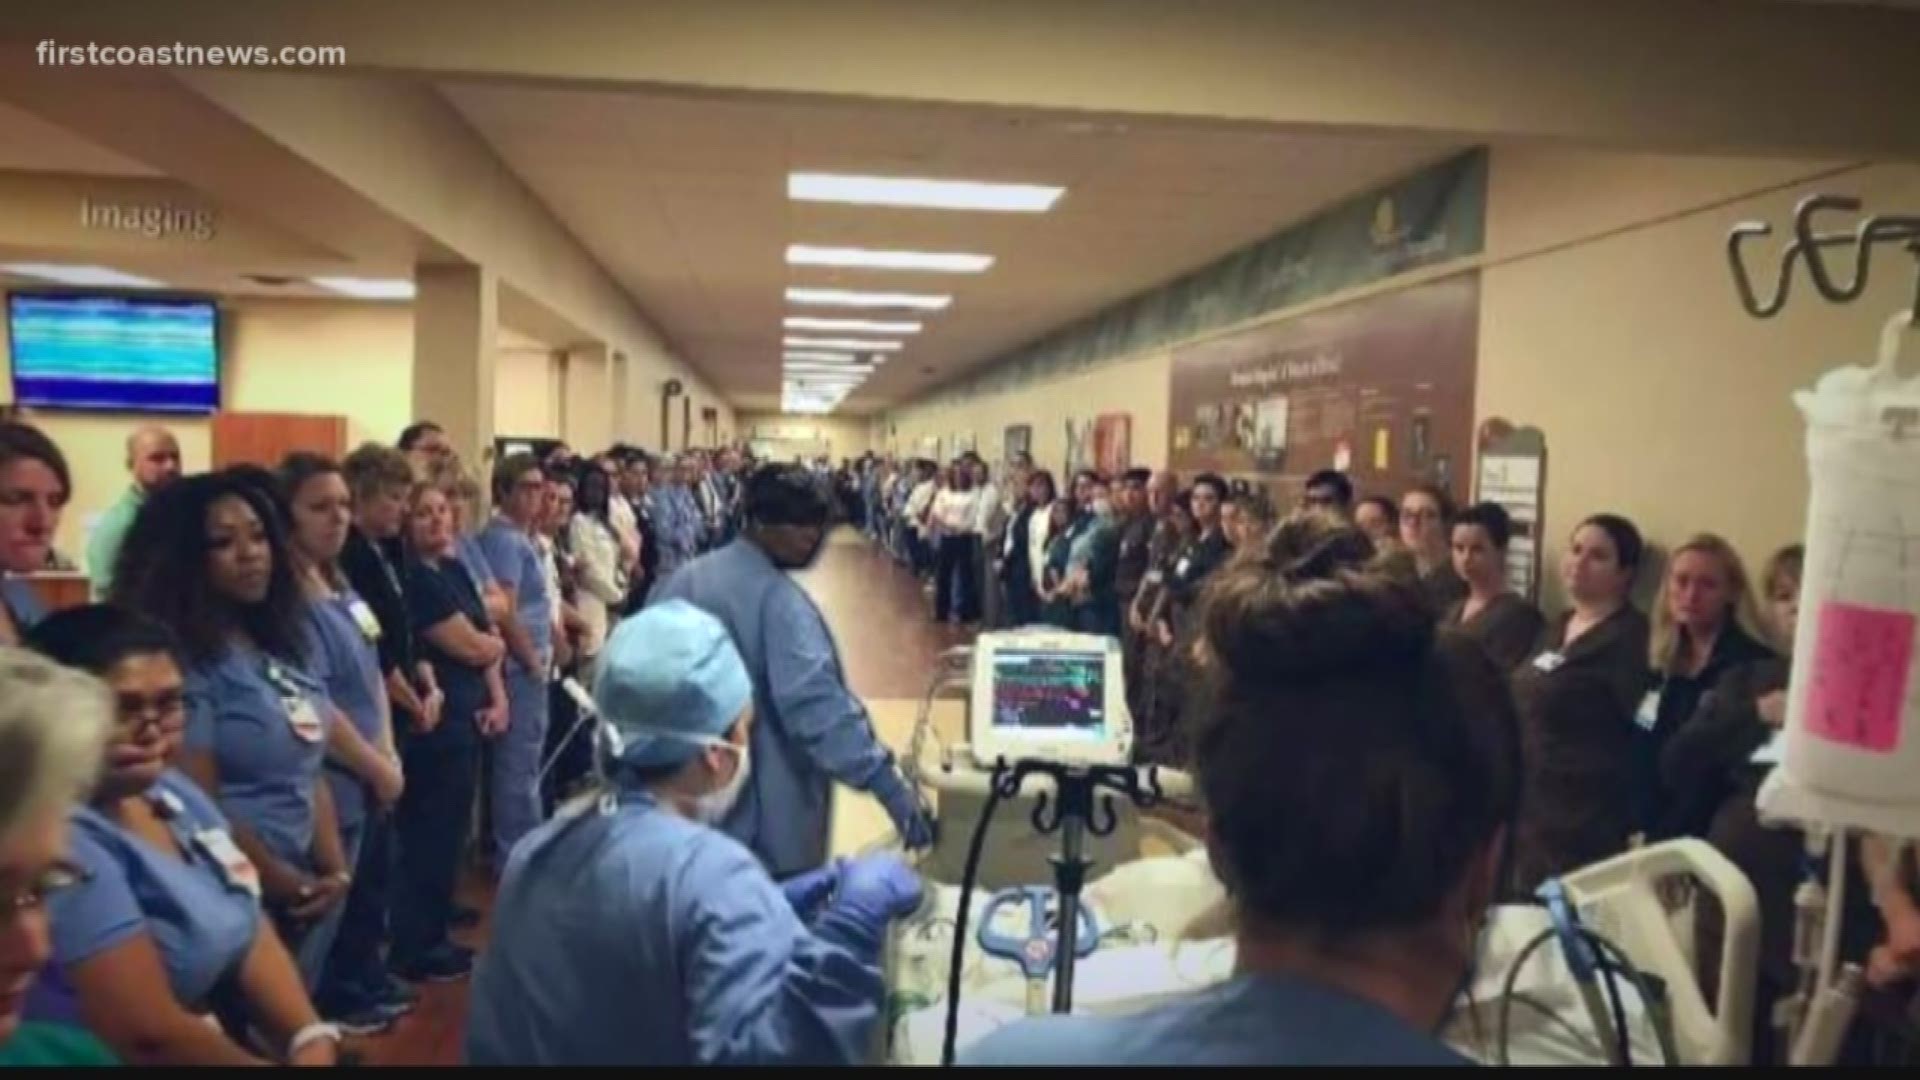 More than 100 Memorial Hospital employees lined the halls for the hospital's first Honor Walk. They paid their respects to a man whose life had ended but whose body would help others live.